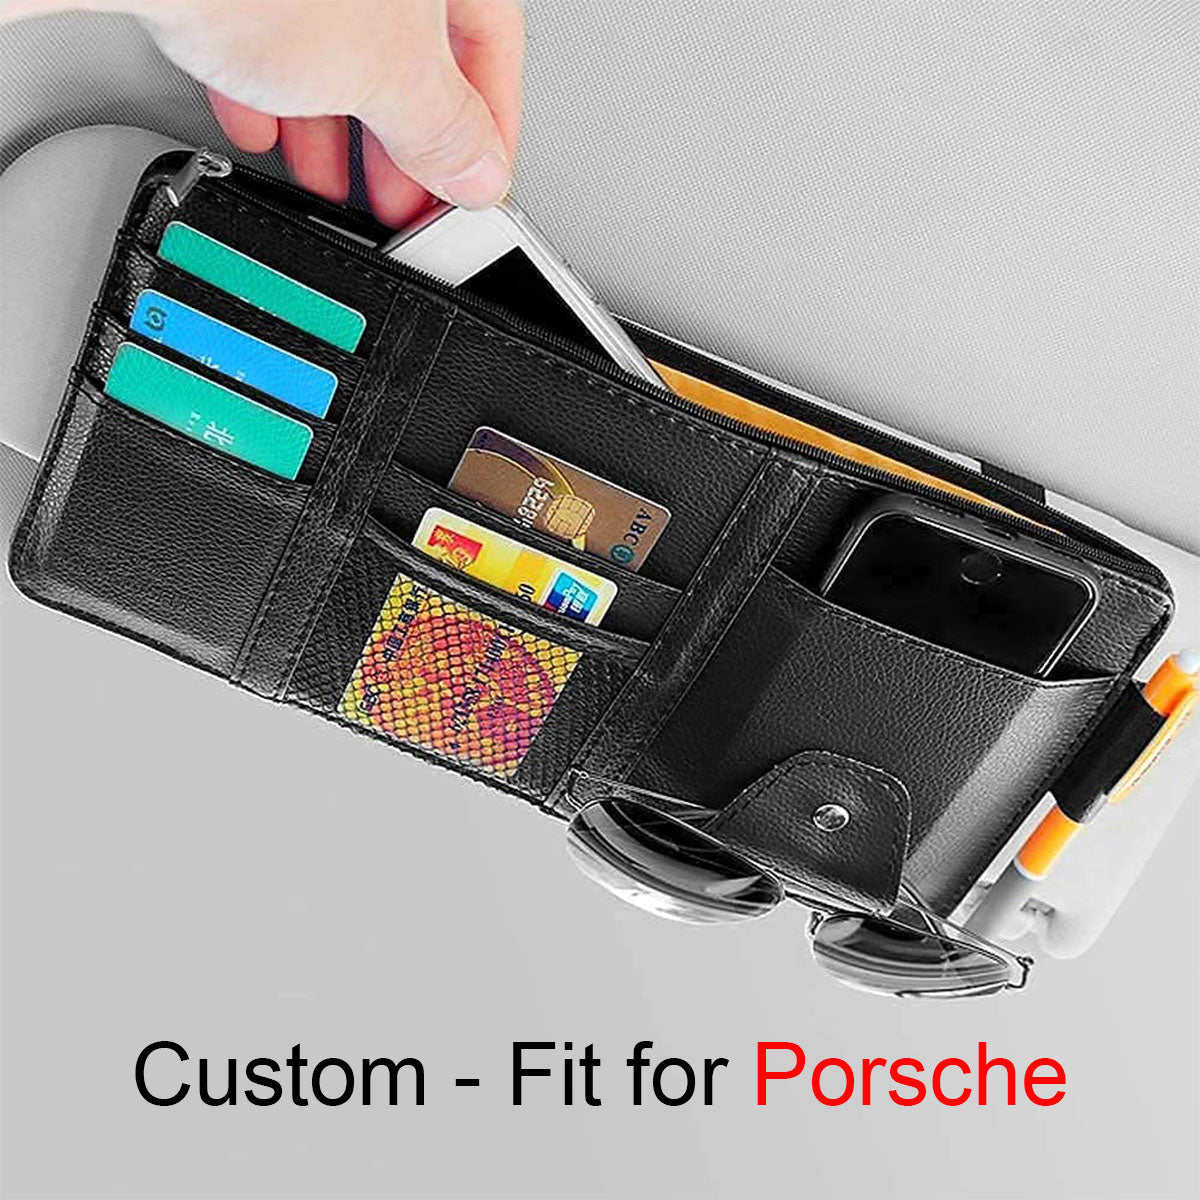 Car Sun Visor Organizer - Auto Interior Accessories Pocket Organizer, Insurance and Registration Wallet Storage Pouch for Cars - Cards, Pens, Sunglasses and Document Holder